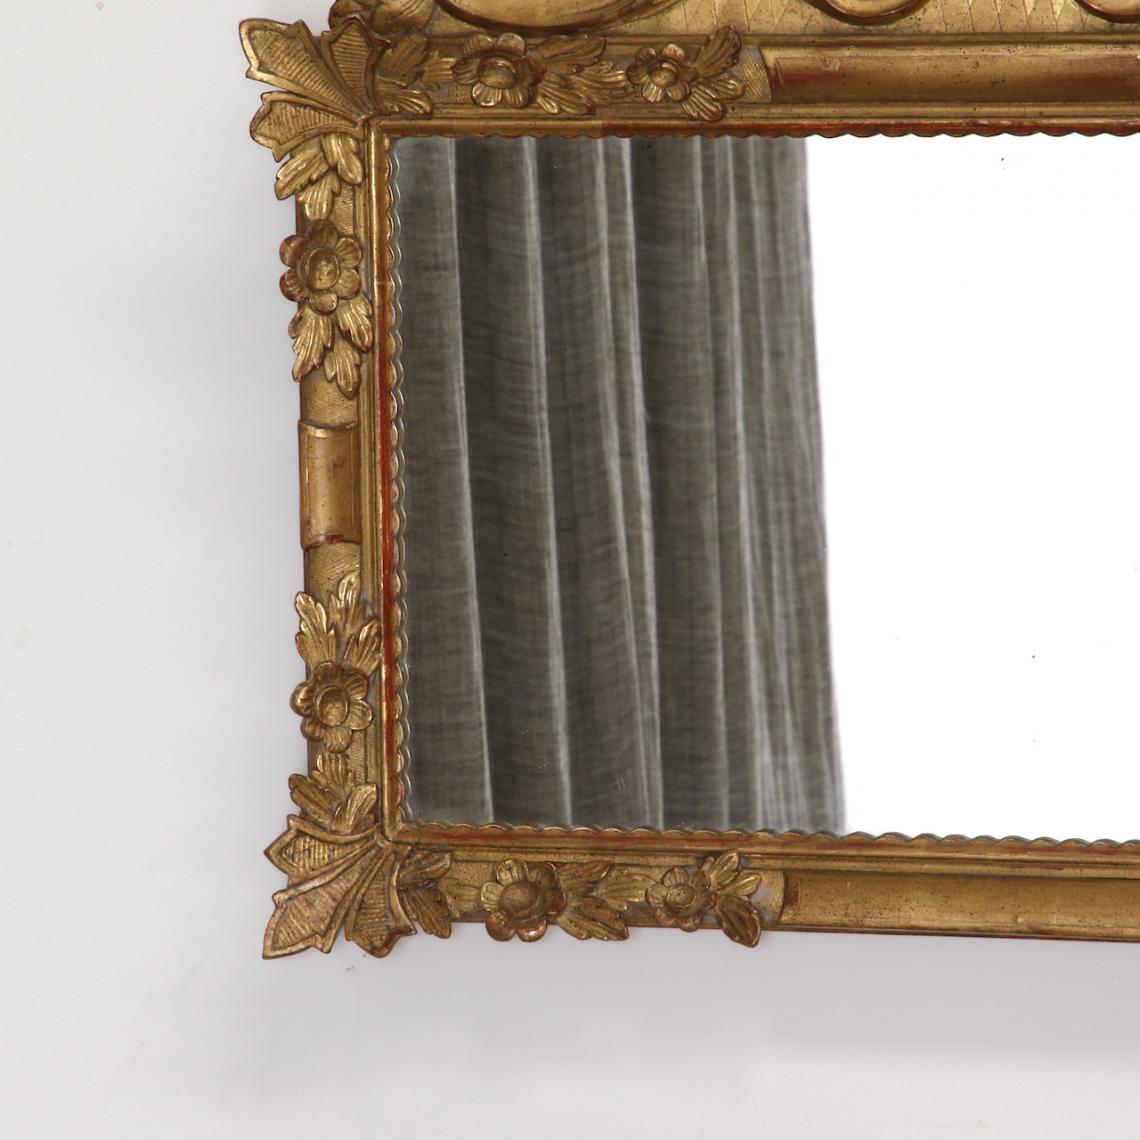 Small Landscape Mirror With Crest